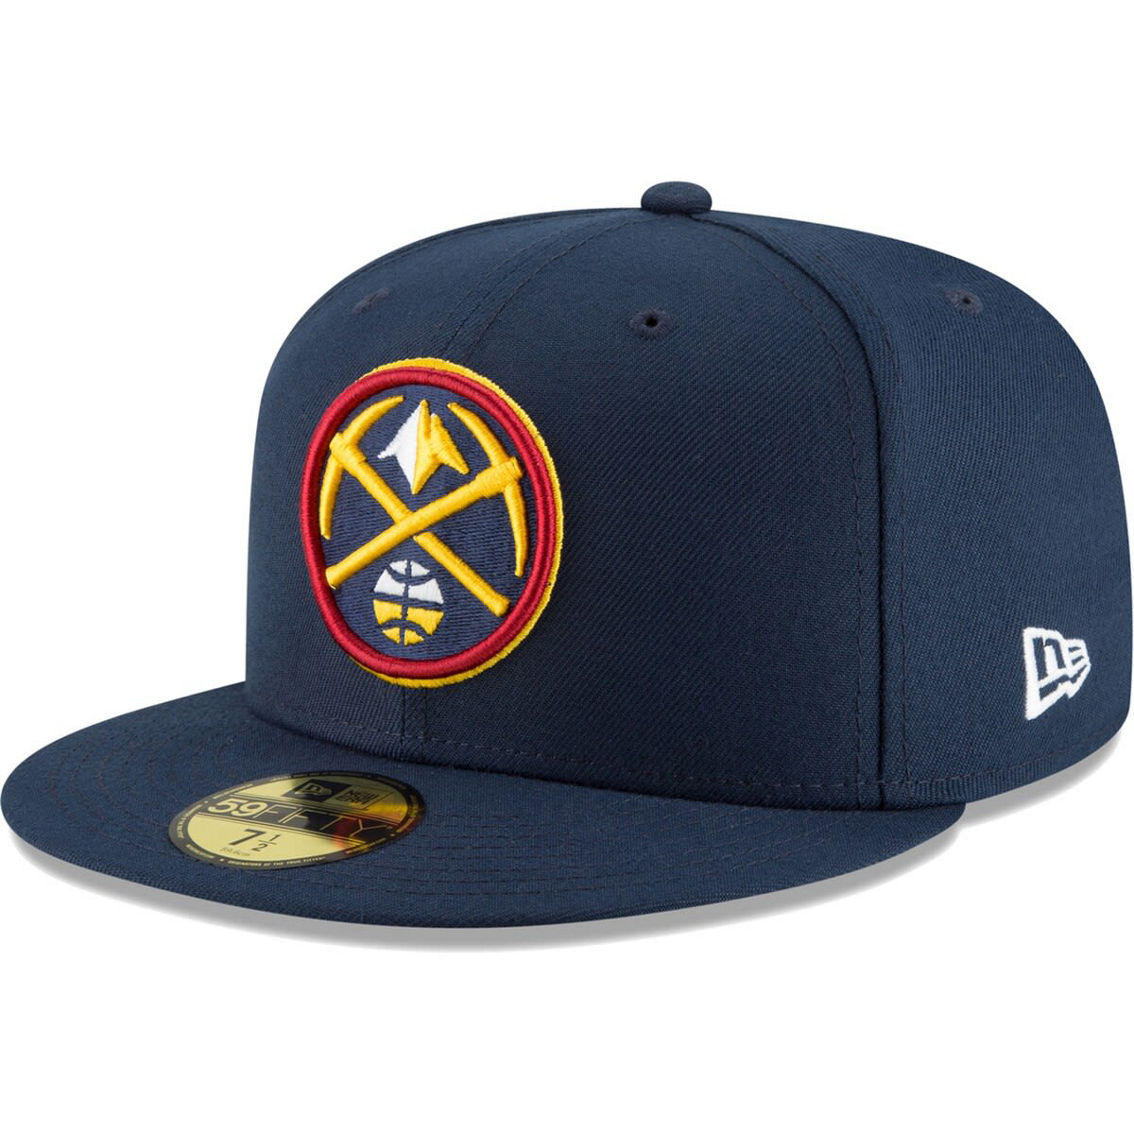 New Era Men's Navy Denver Nuggets Team 59FIFTY Fitted Hat - Image 2 of 4